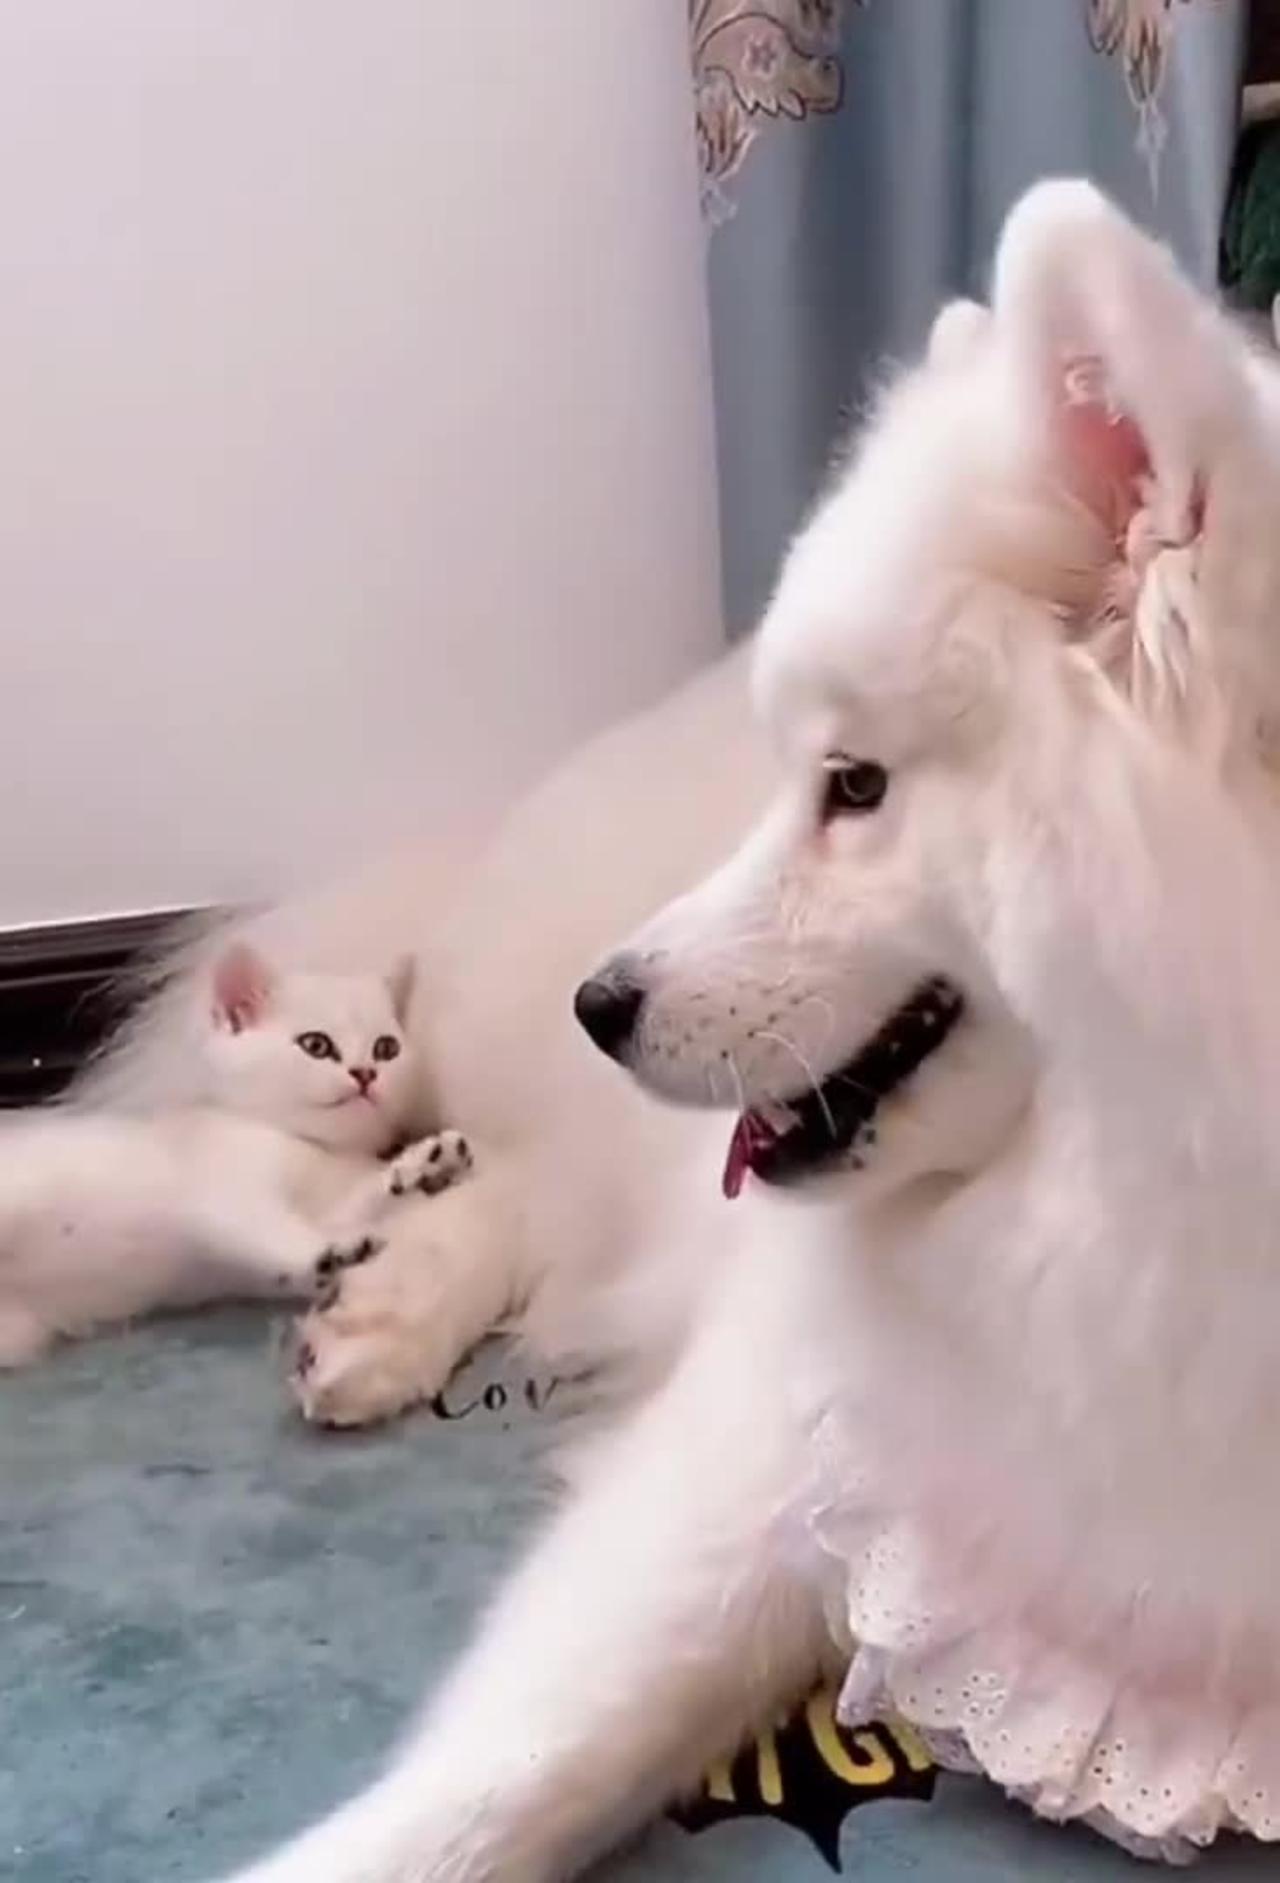 Dog play with his puppy funny moments